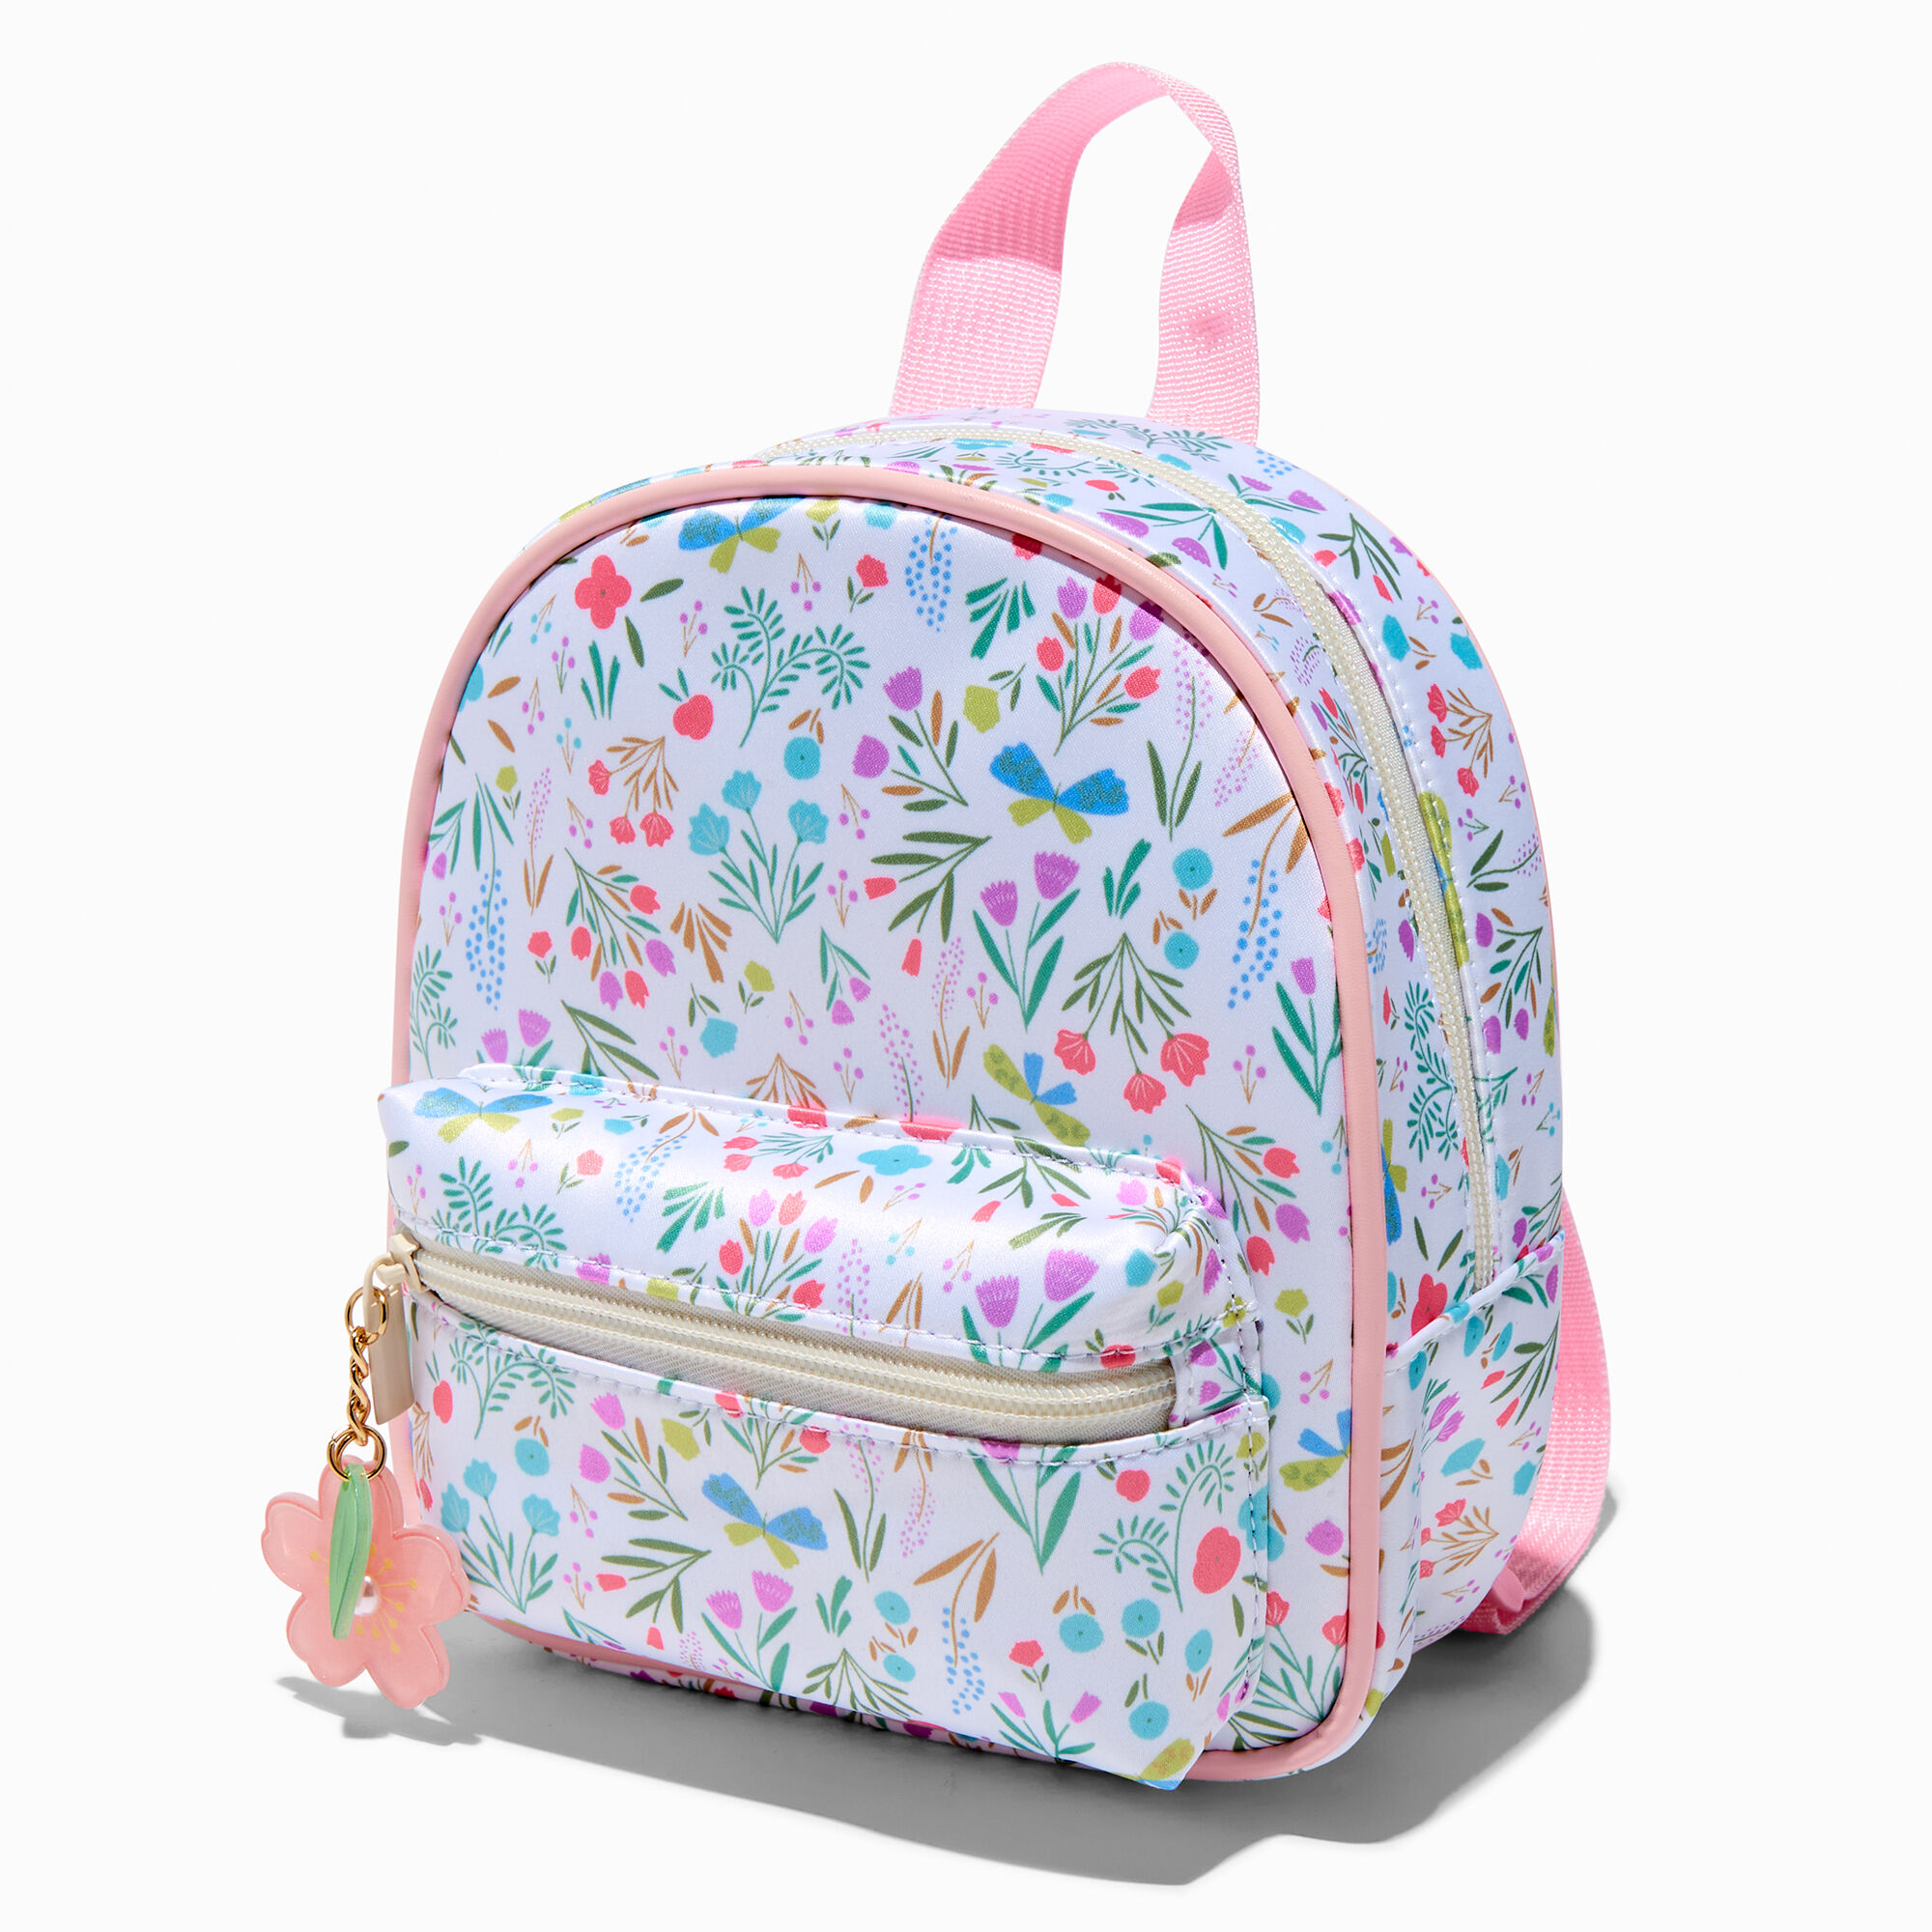 View Claires Club Spring Flower Backpack information